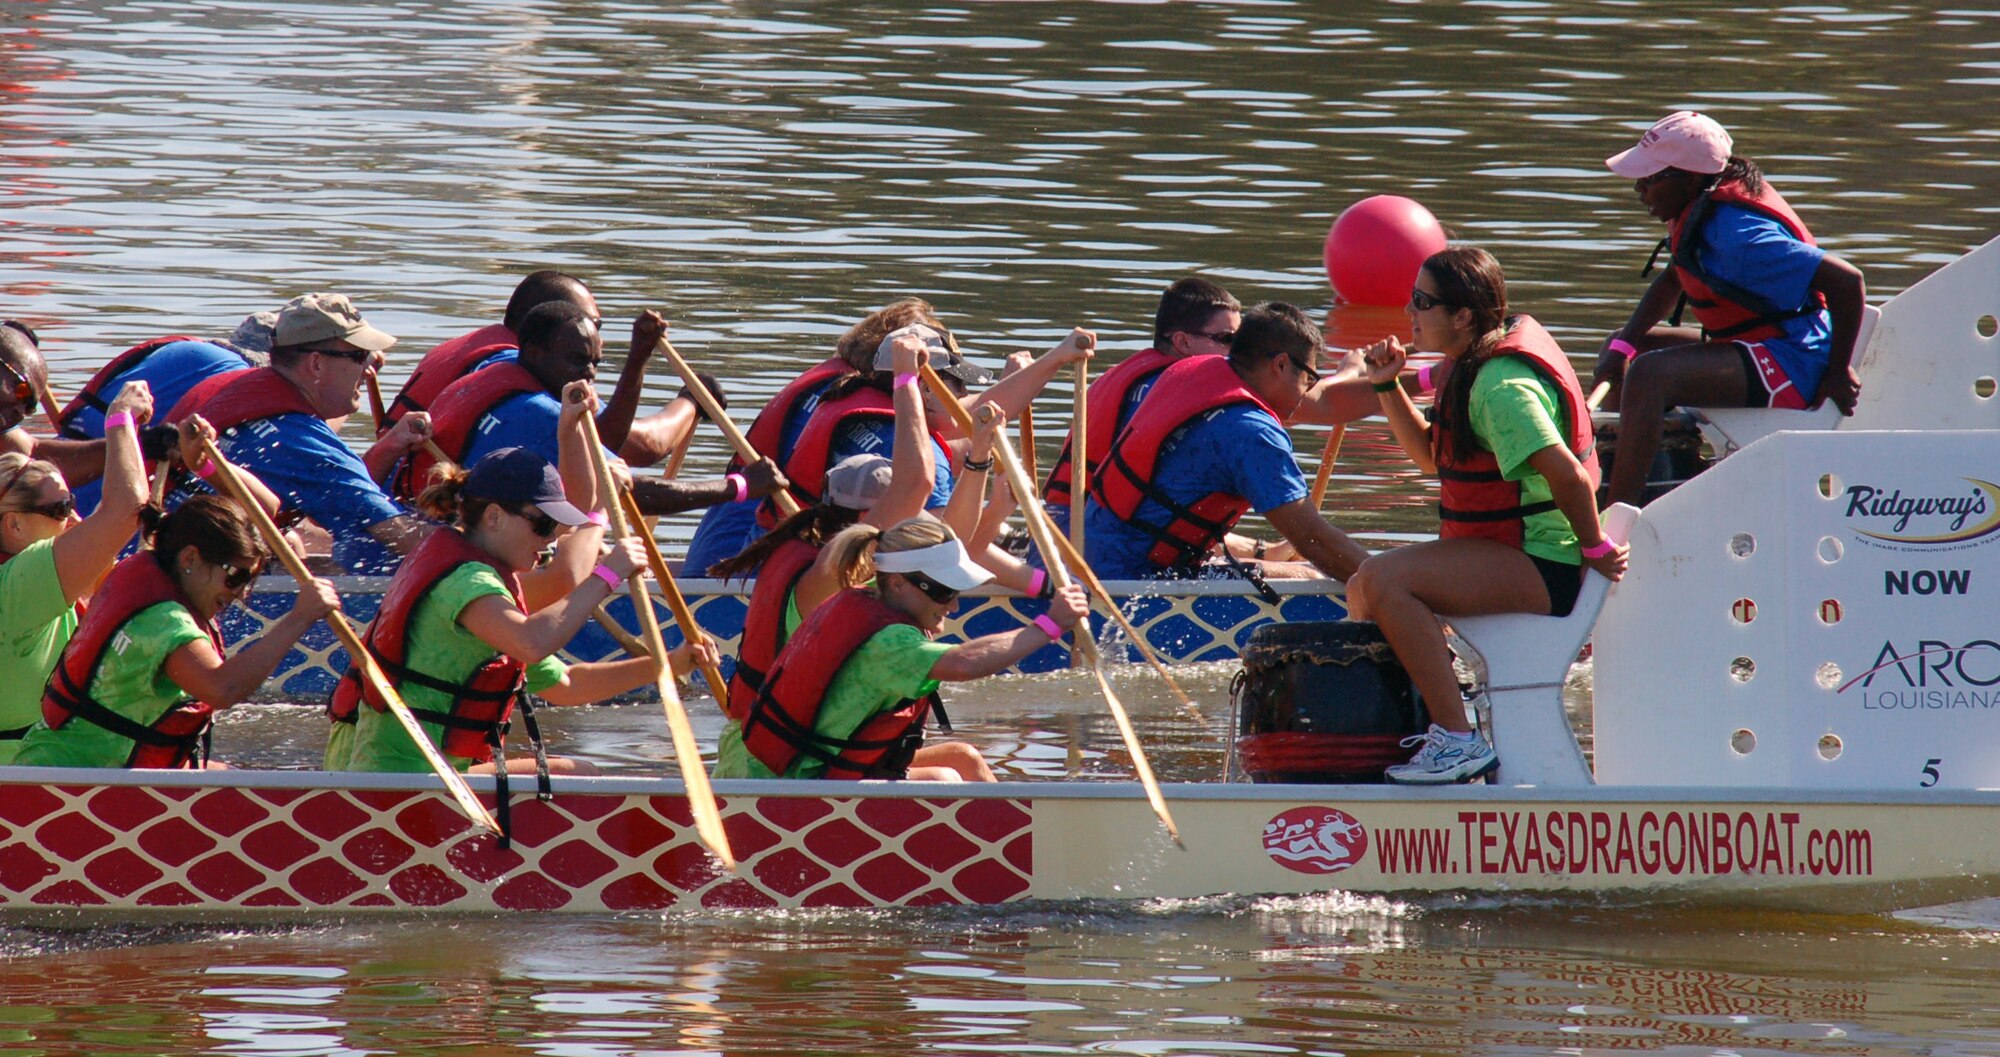 SHREVEPORT, La. – Members of the “Mighty Eighth” dragon boat team (blue shirts) tries to hold off a late rally by another team in the dragon boat races during the third annual Red River Dragon Boat Festival Sept. 10, 2011. This year's race featured 27 teams, all vigorously paddling 41-foot-long boats to the finish line. Each team is comprised of a minimum of 20 paddlers, a captain and a drummer who beats the cadence as they paddle. (U.S. Air Force photo by Staff Sgt. Brian Stives)